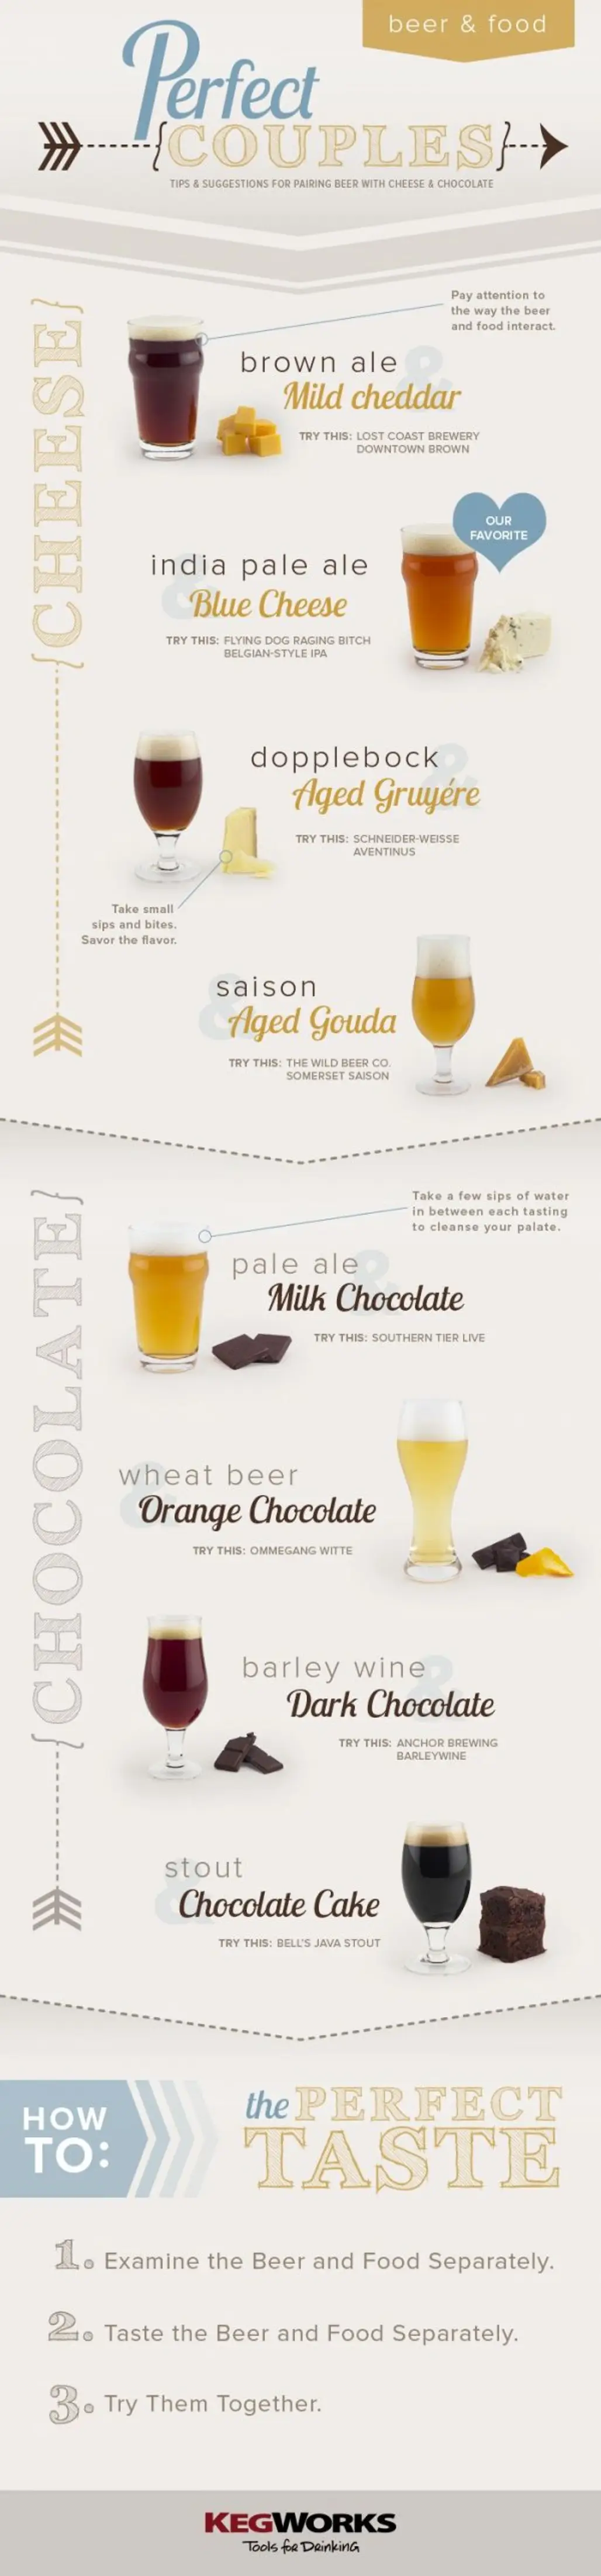 Beer and Cheese... and Chocolate!